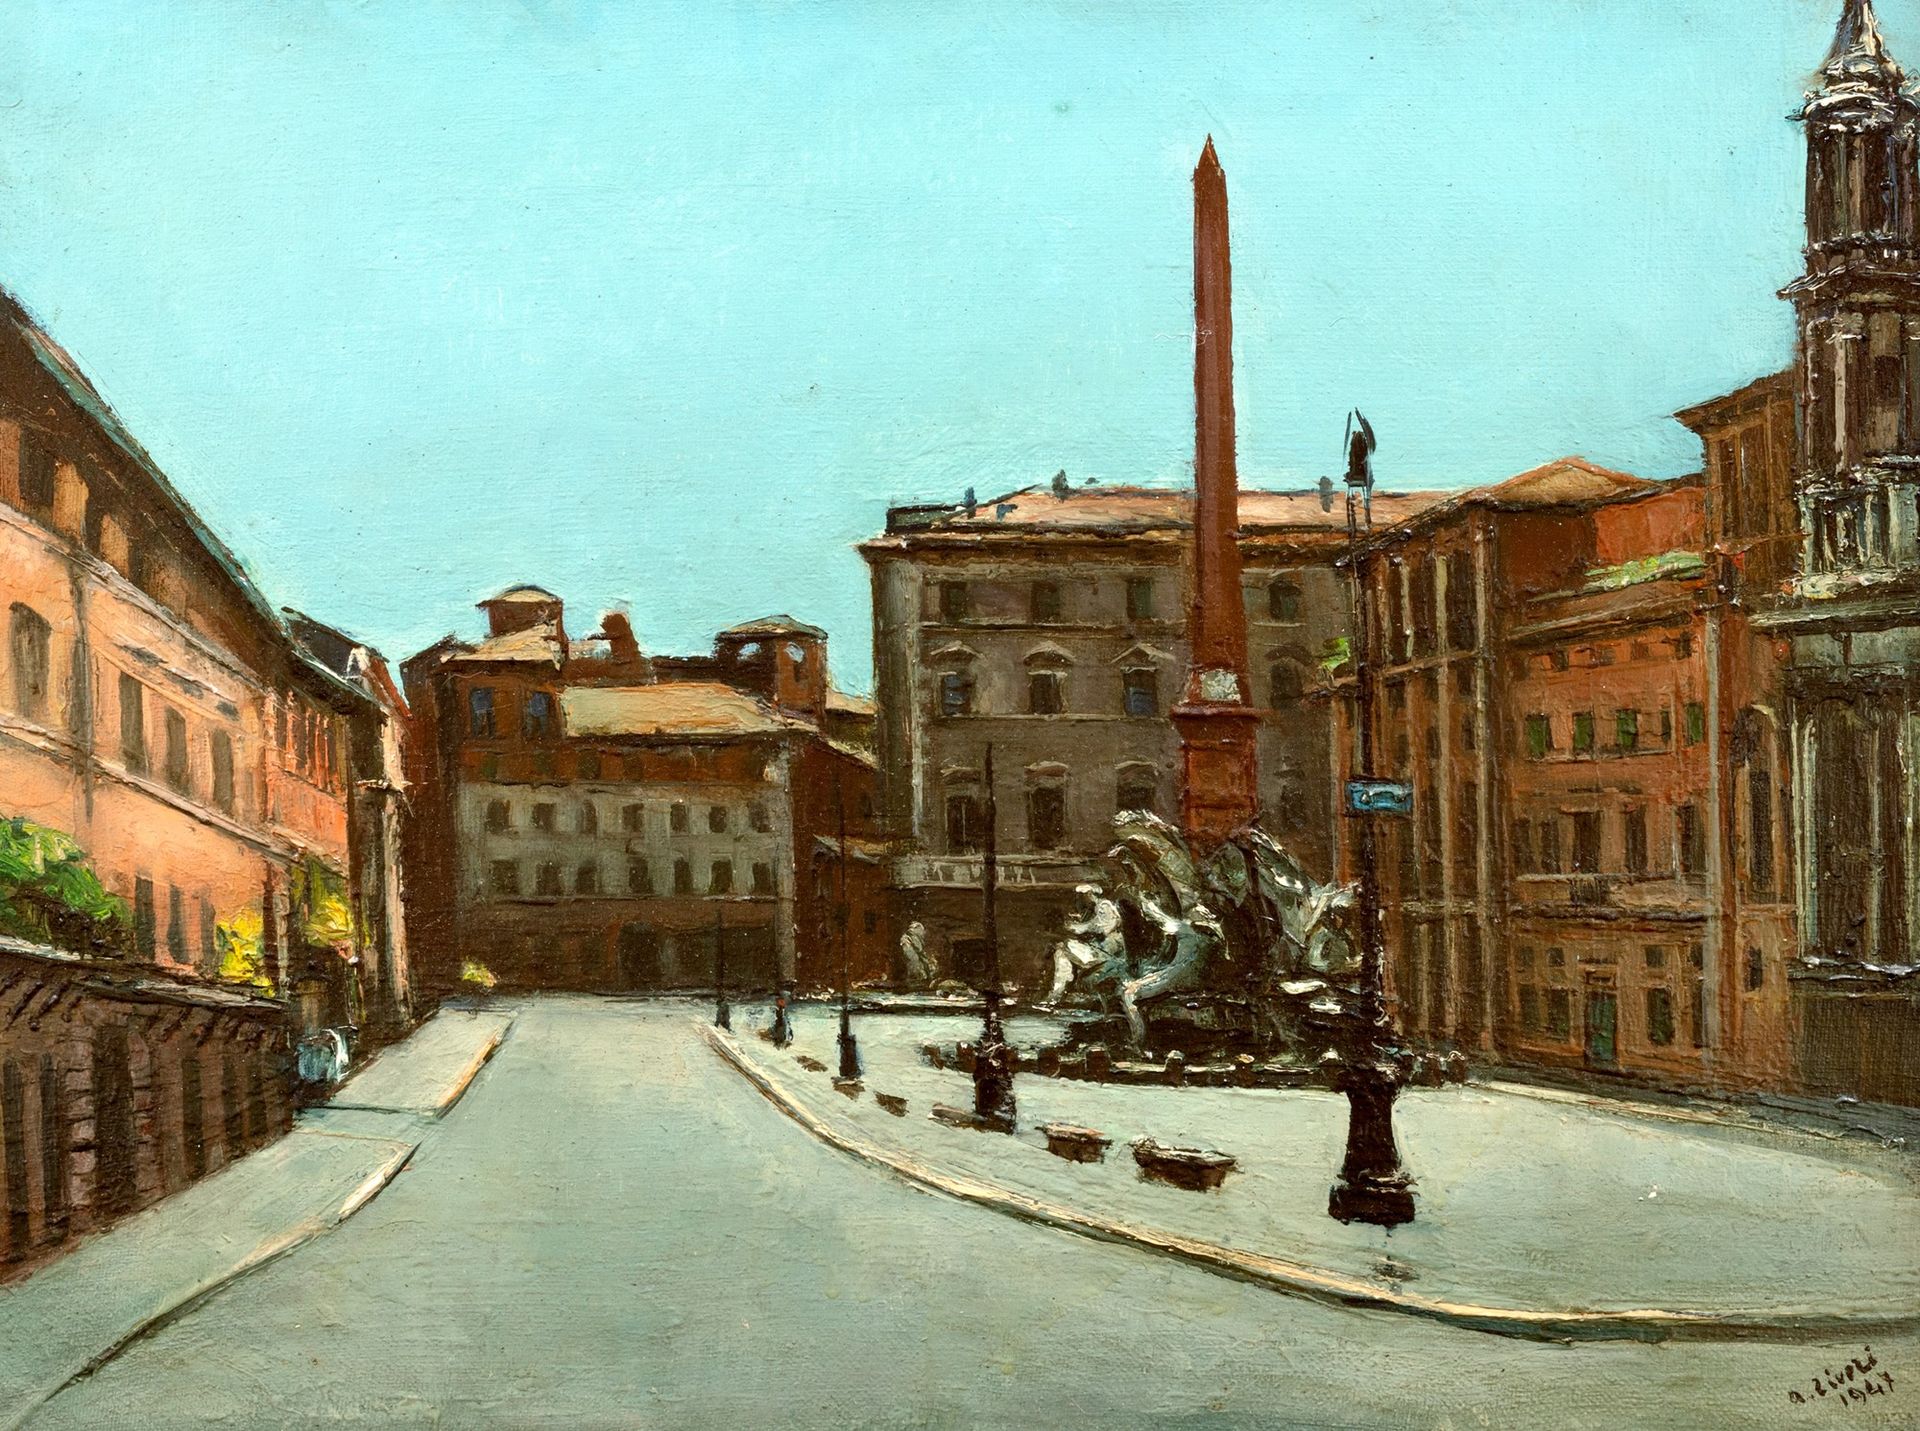 ALBERTO ZIVERI Piazza Navona, 1947

oil on canvas
50 x 60 cm
Signed lower right:&hellip;